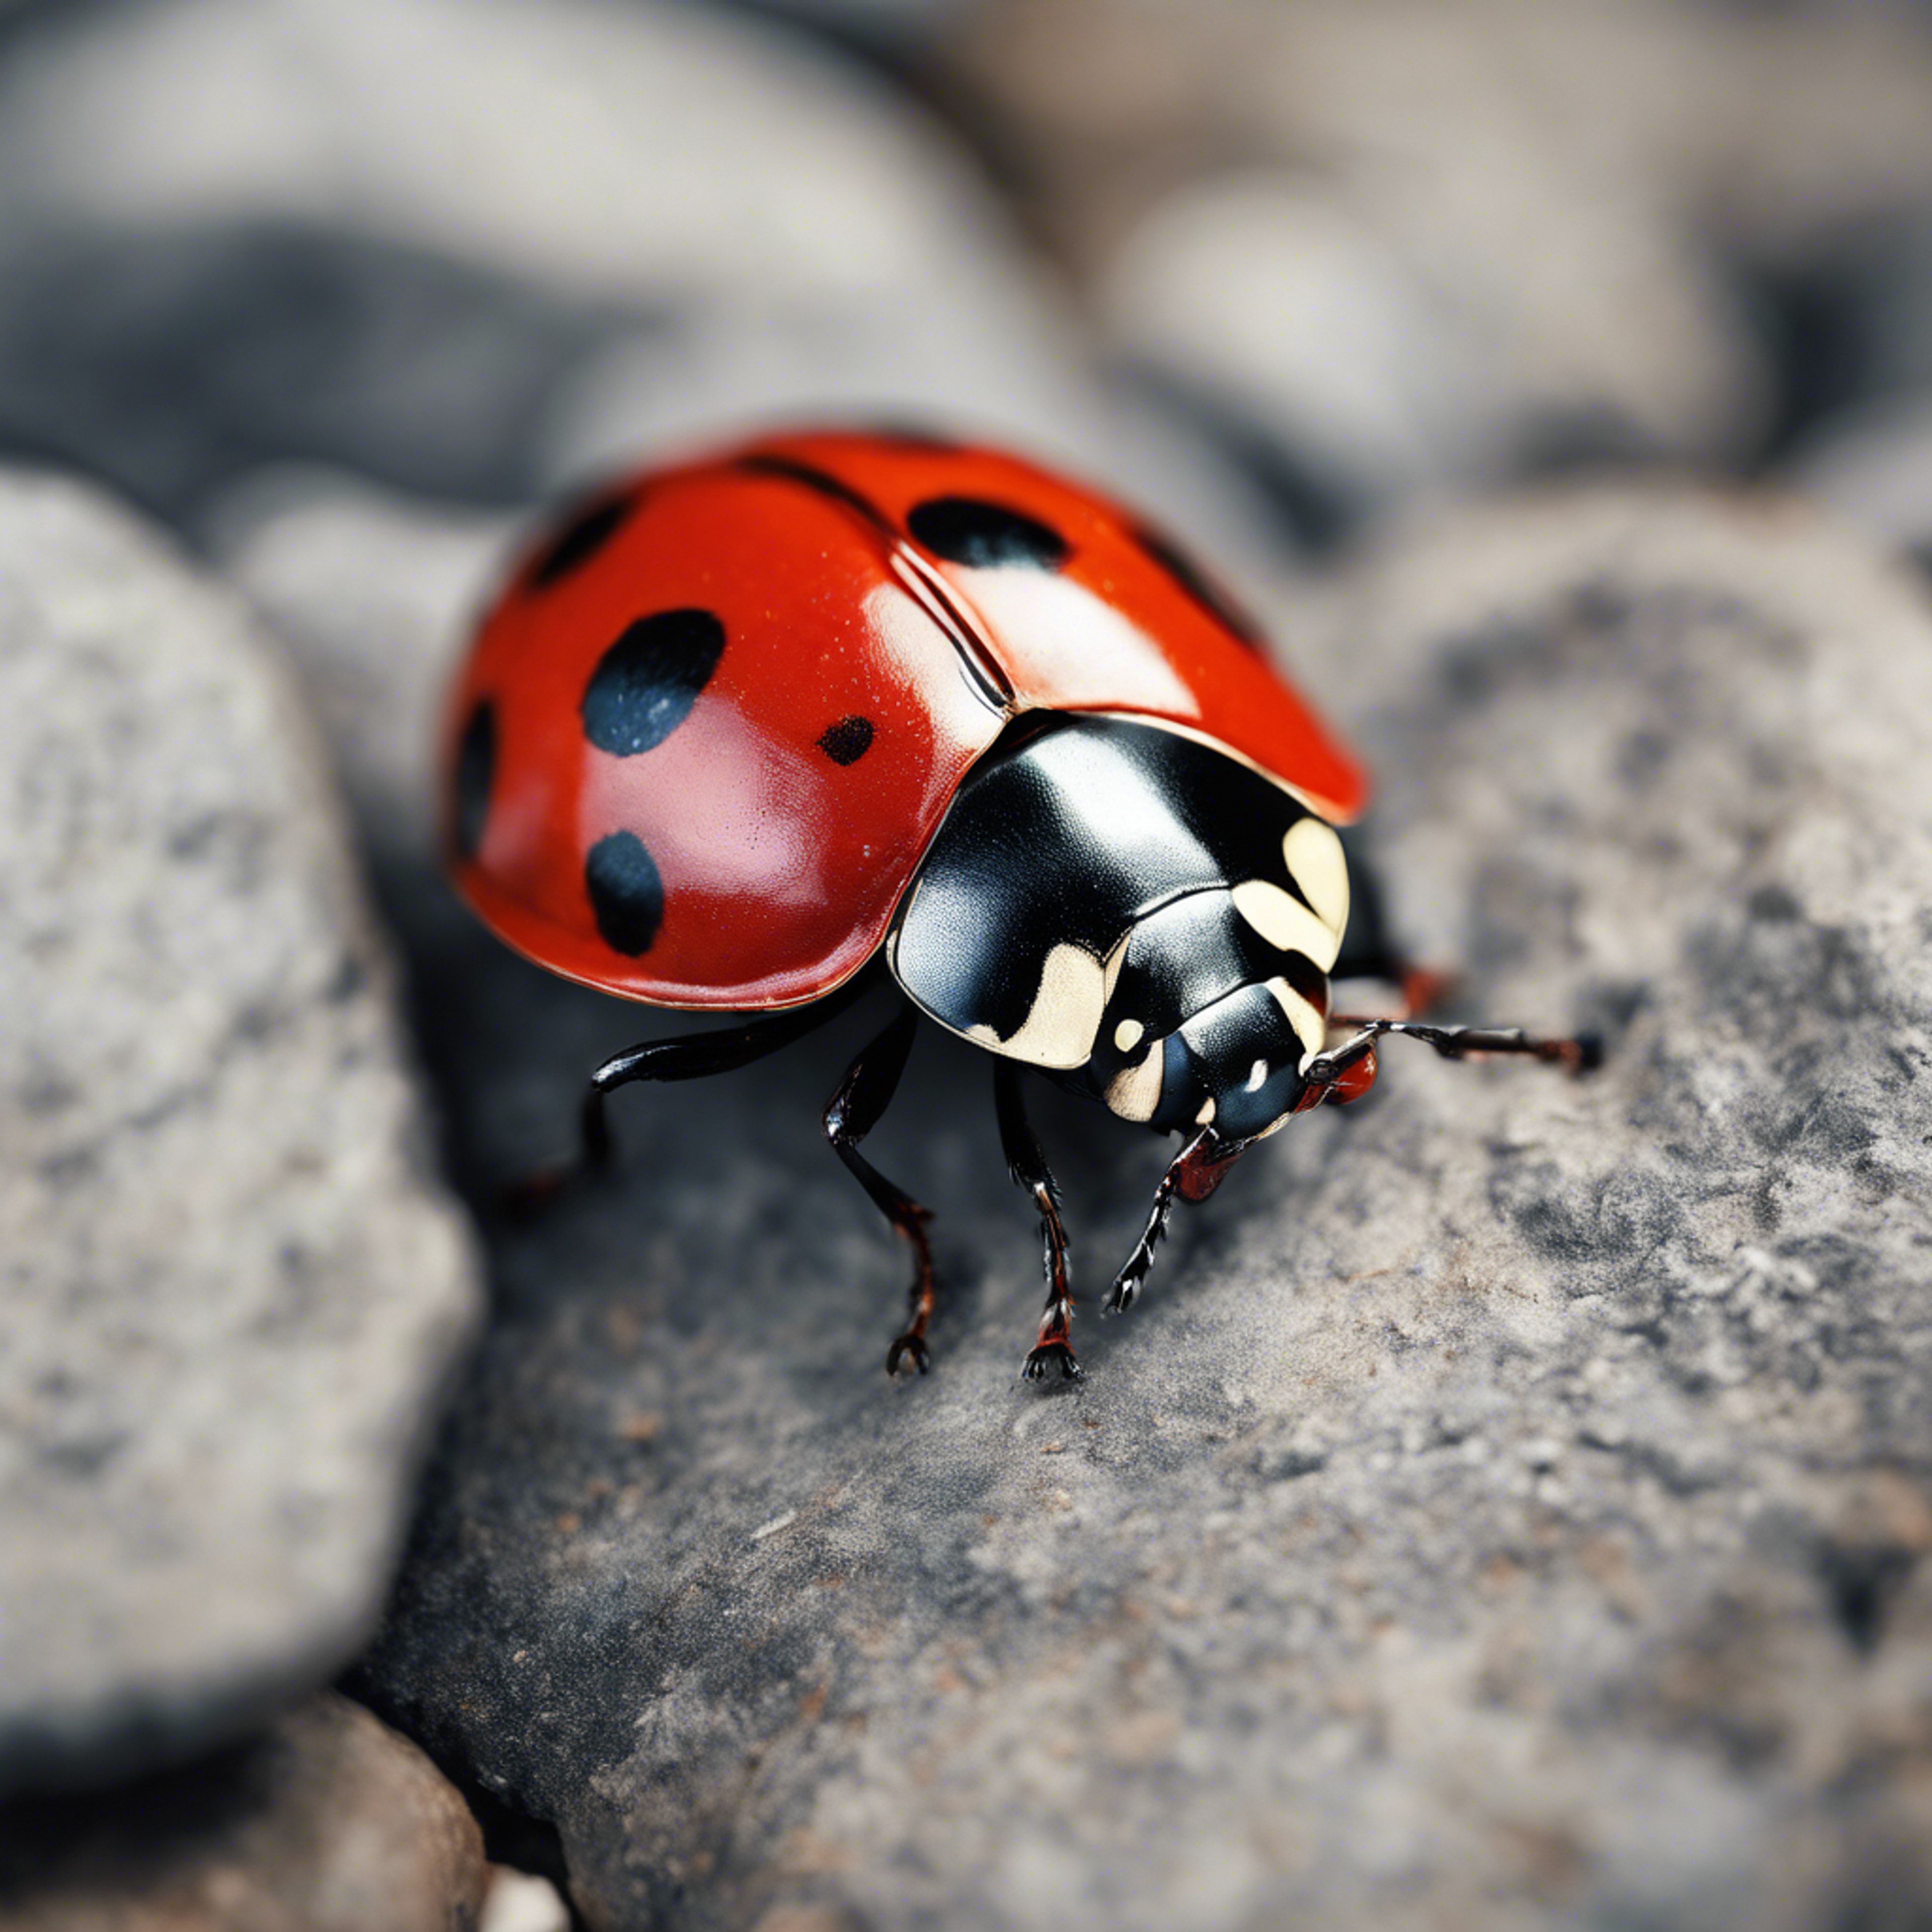 A fearless ladybug with bright red wings crawling over a dull, grey stone. Wallpaper[cb02e673ce6f479eab40]